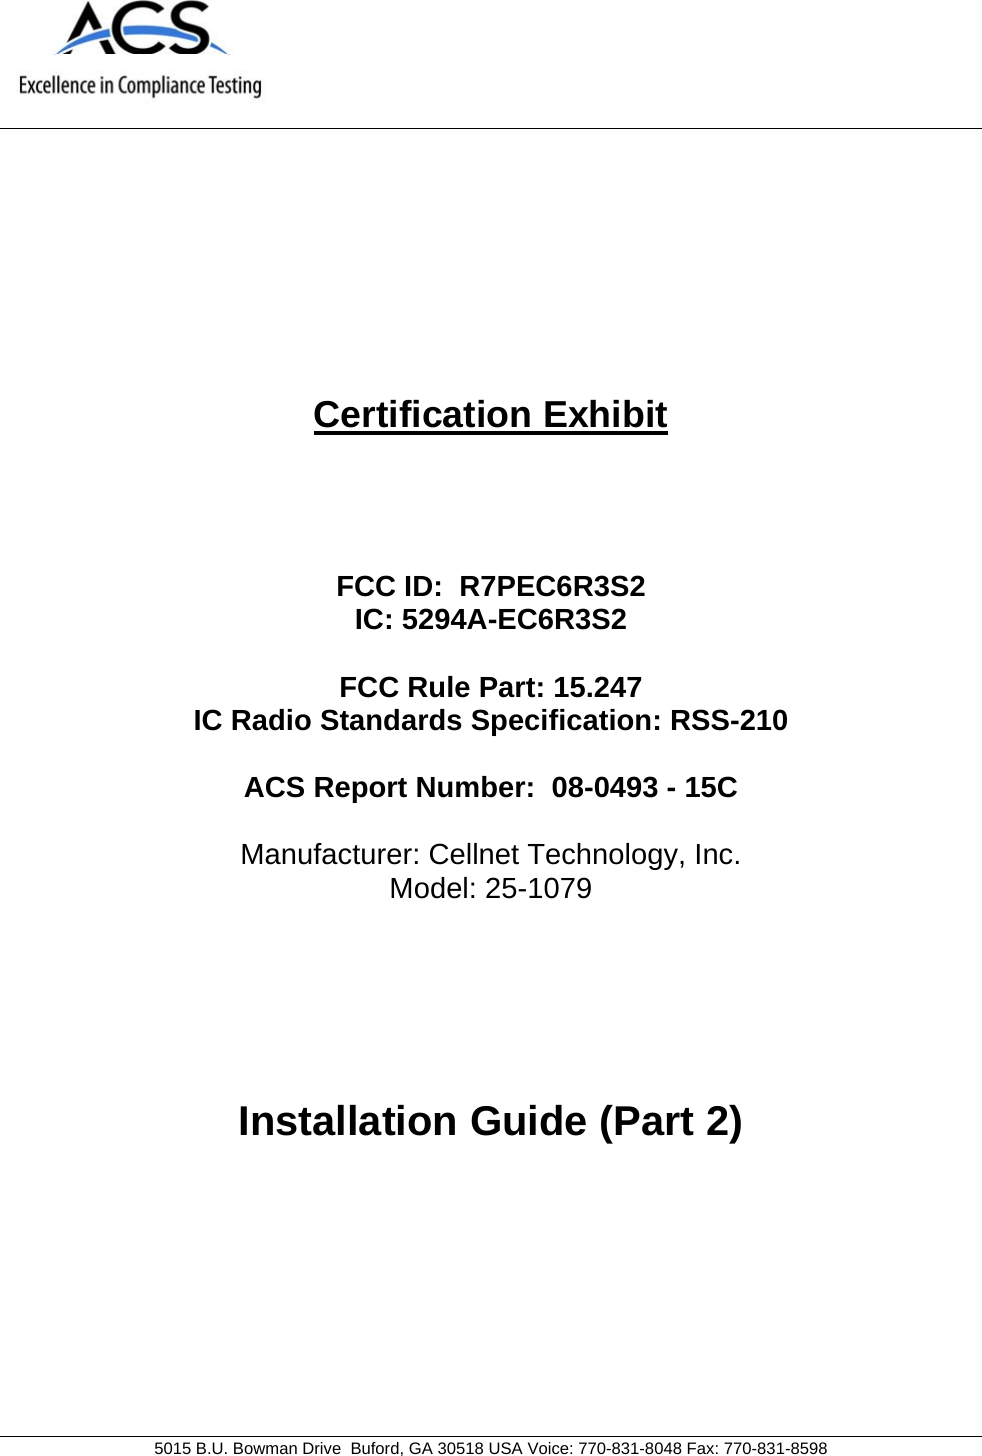     5015 B.U. Bowman Drive  Buford, GA 30518 USA Voice: 770-831-8048 Fax: 770-831-8598   Certification Exhibit     FCC ID:  R7PEC6R3S2 IC: 5294A-EC6R3S2  FCC Rule Part: 15.247 IC Radio Standards Specification: RSS-210  ACS Report Number:  08-0493 - 15C   Manufacturer: Cellnet Technology, Inc. Model: 25-1079     Installation Guide (Part 2)  